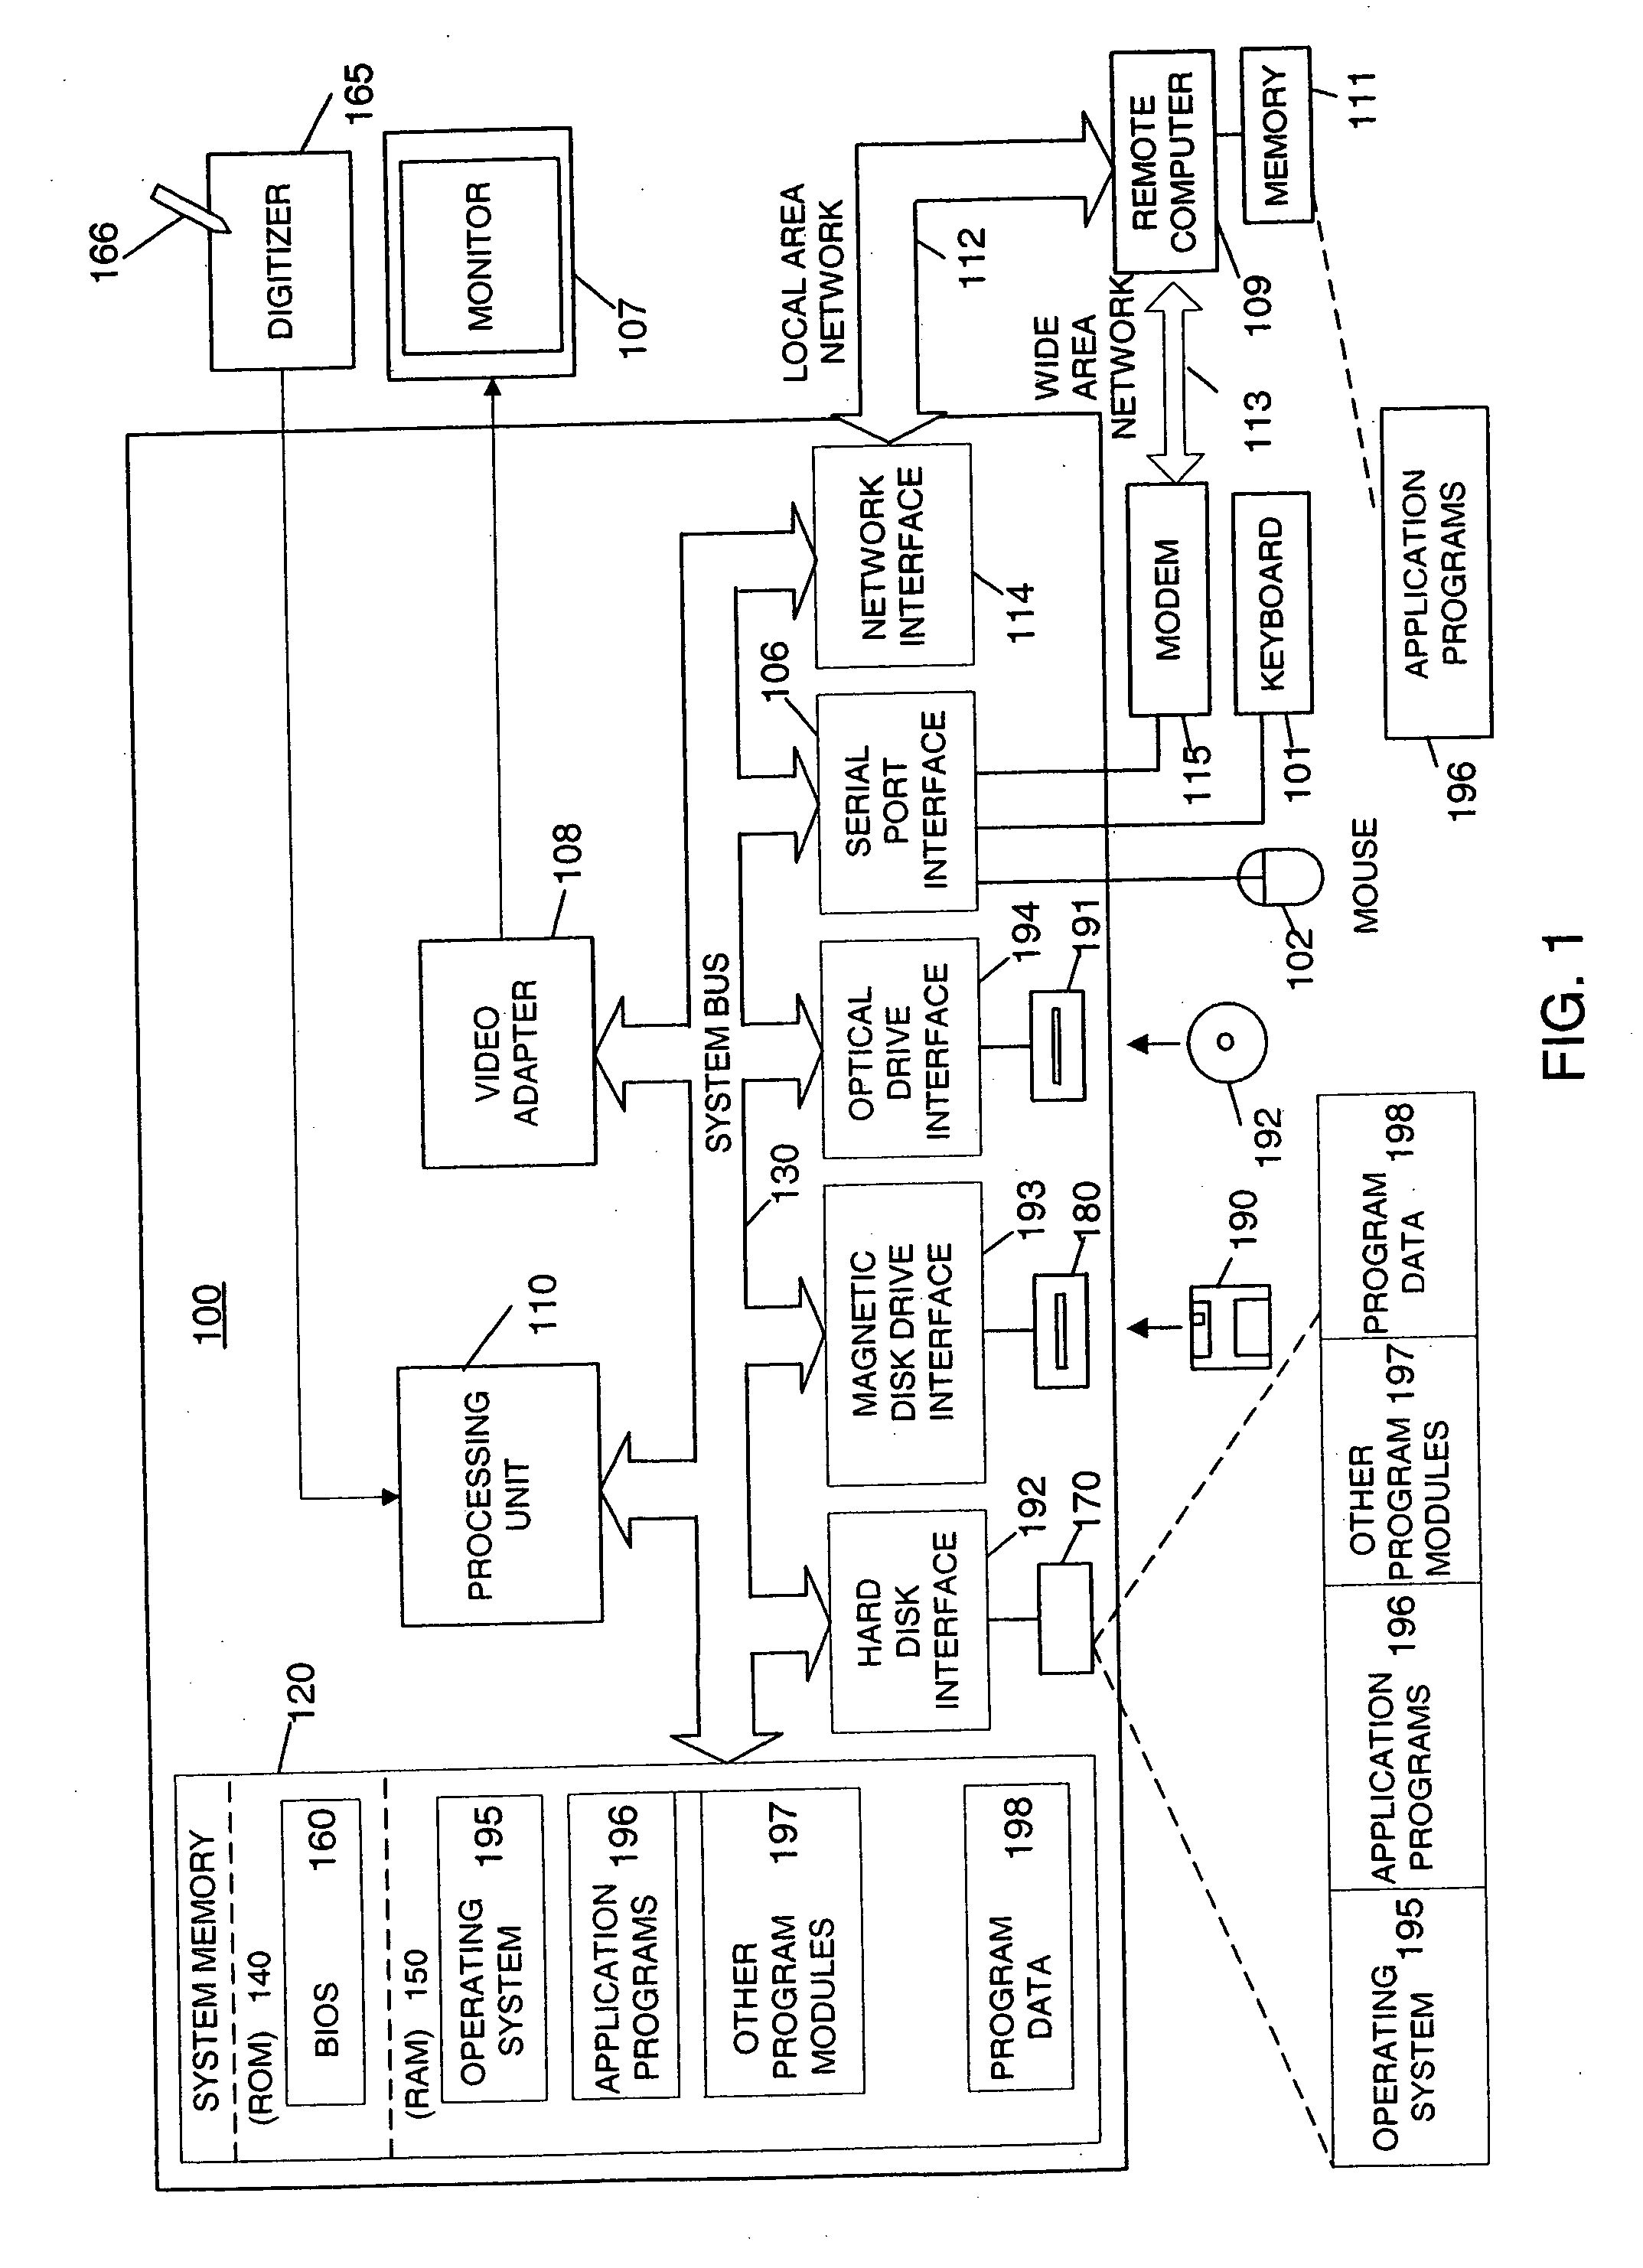 Method and apparatus for managing input focus and z-order